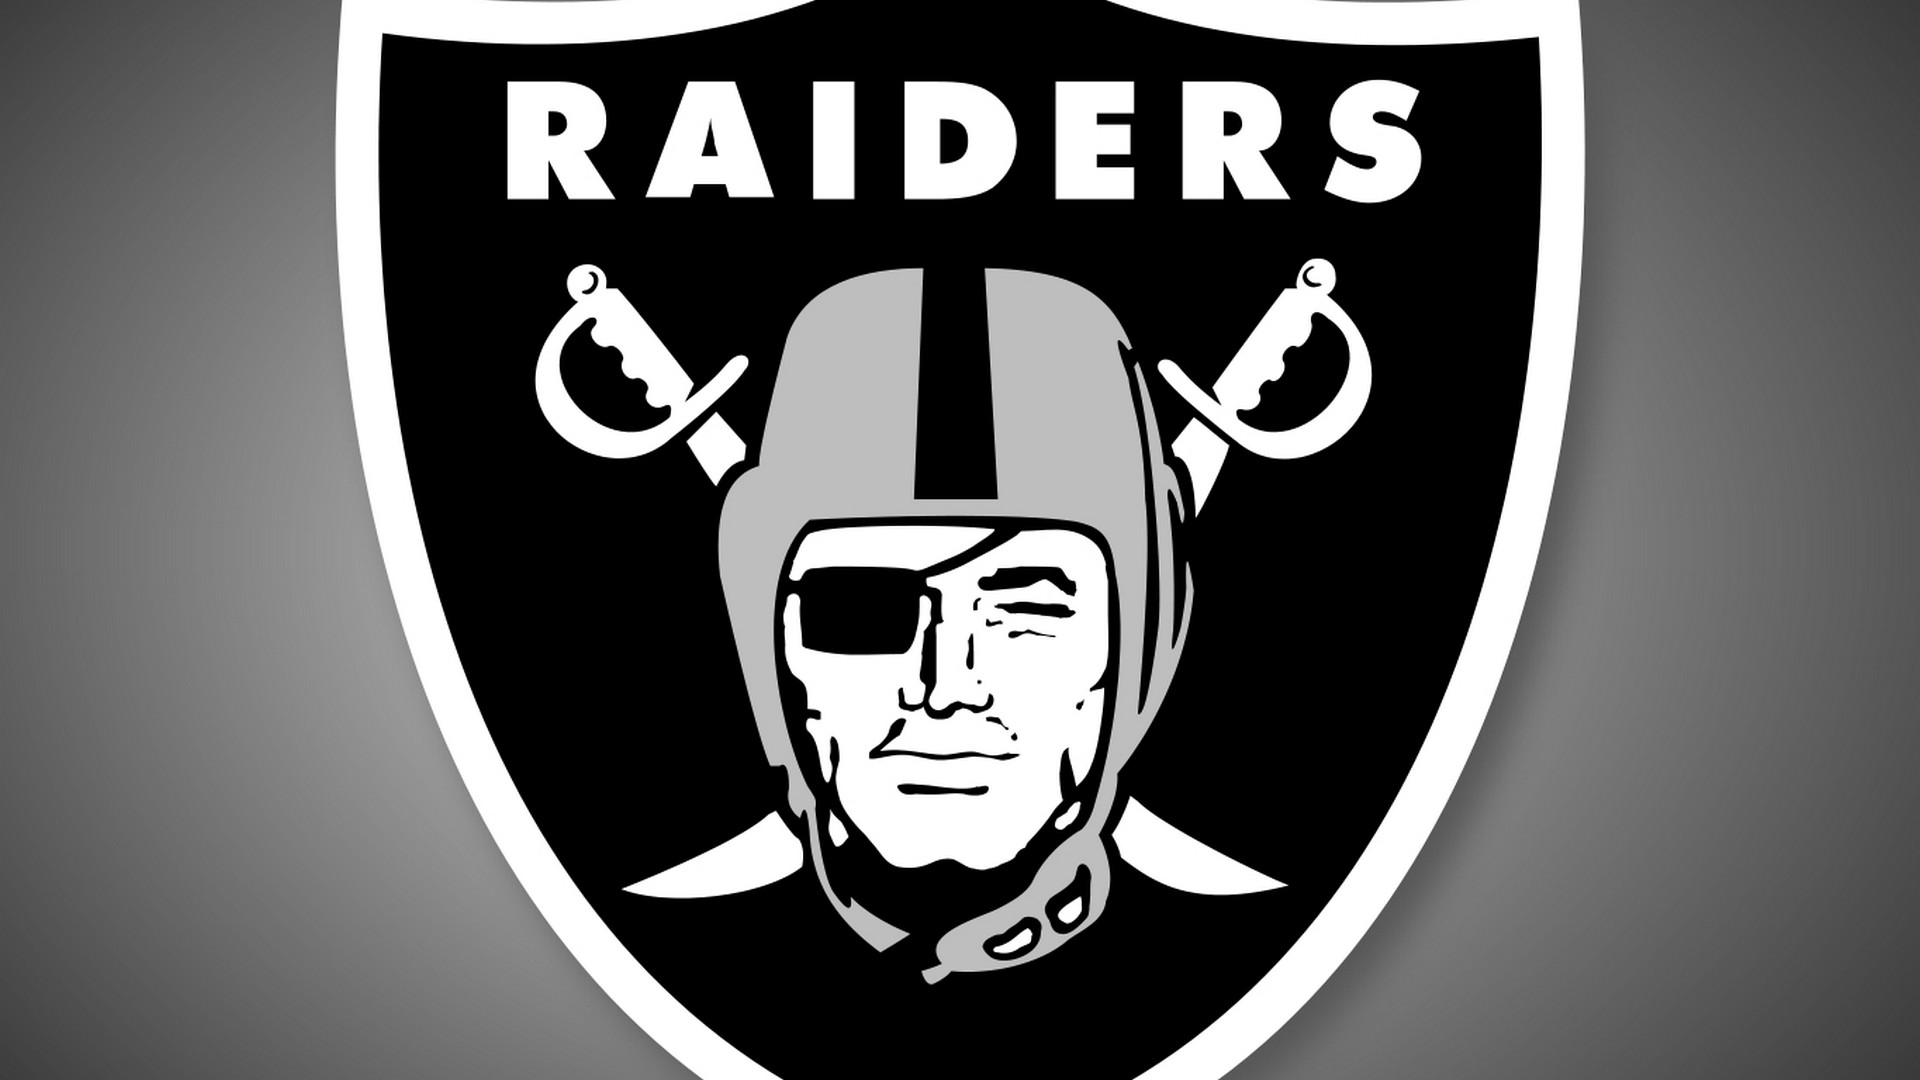 Oakland Raiders Computer Wallpapers With high-resolution 1920X1080 pixel. Download and set as wallpaper for Desktop Computer, Apple iPhone X, XS Max, XR, 8, 7, 6, SE, iPad, Android